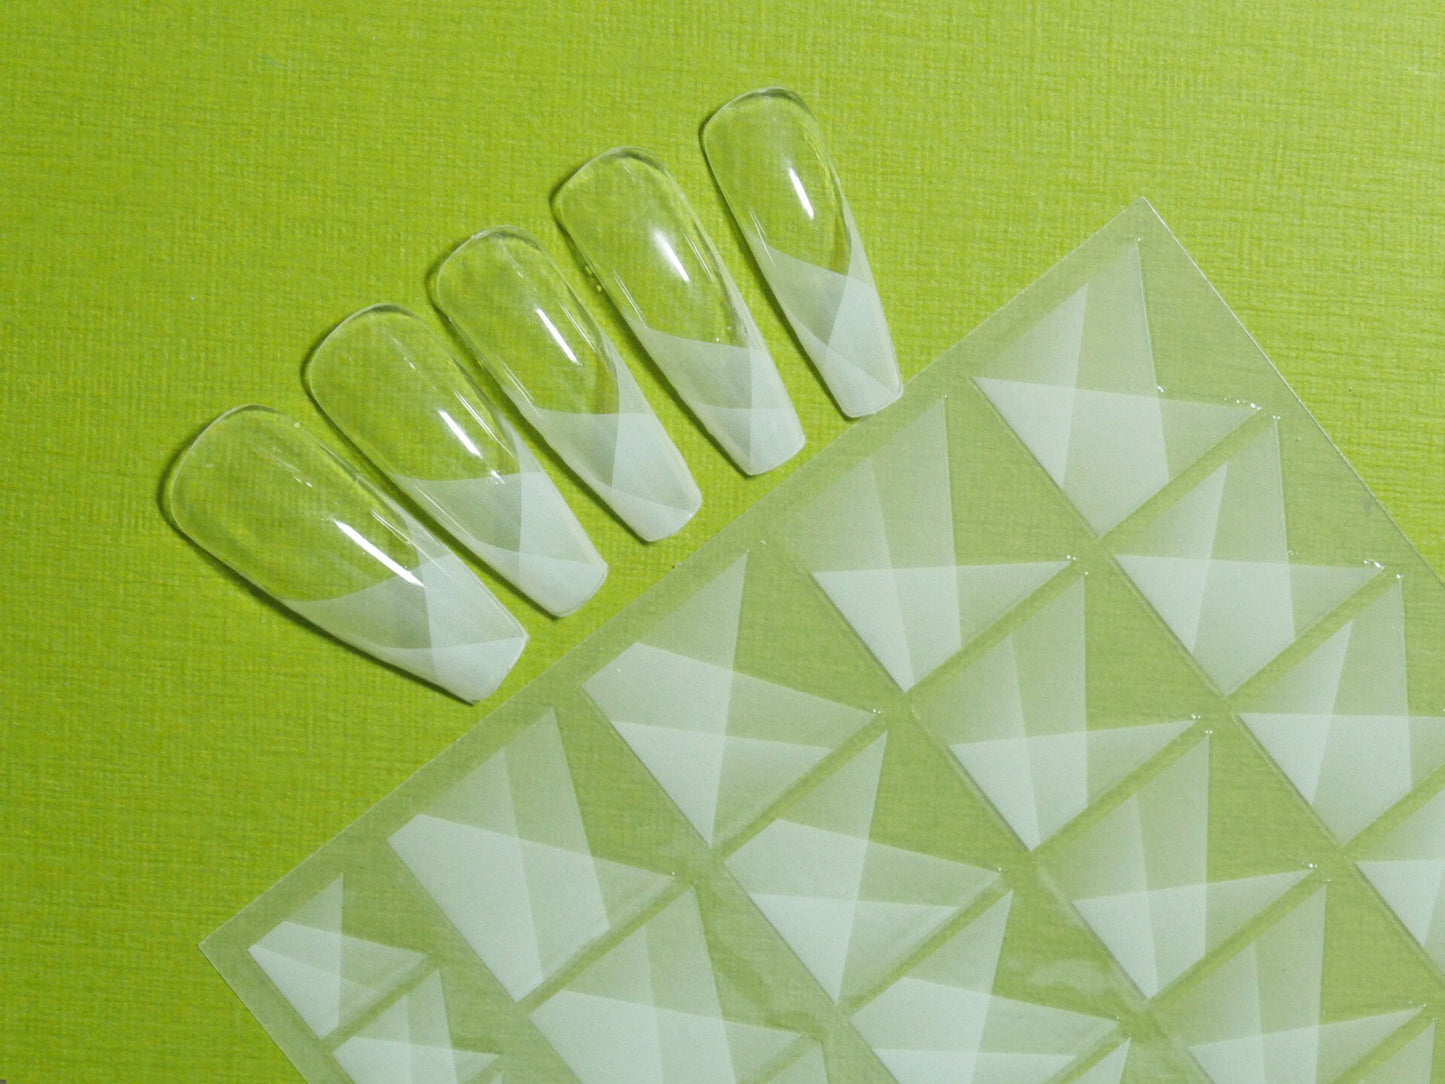 Translucent White Superimposed French Tip Nail Art Sticker